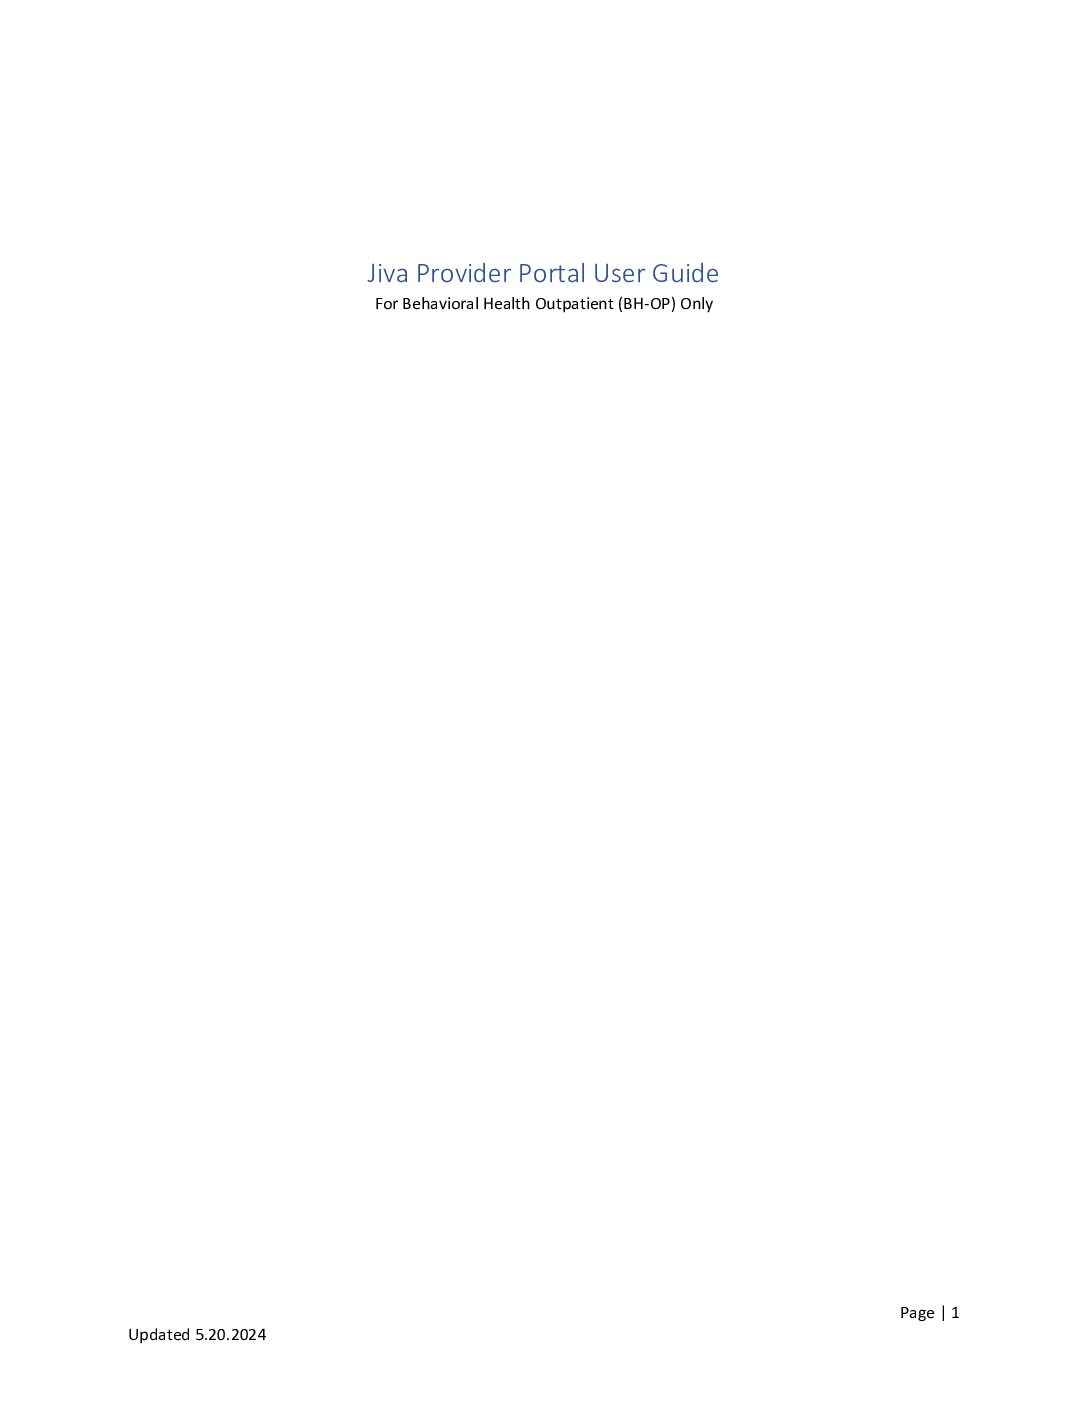 Jiva Provider Portal User Guide: Behavioral Health Outpatient (BH-OP) Only